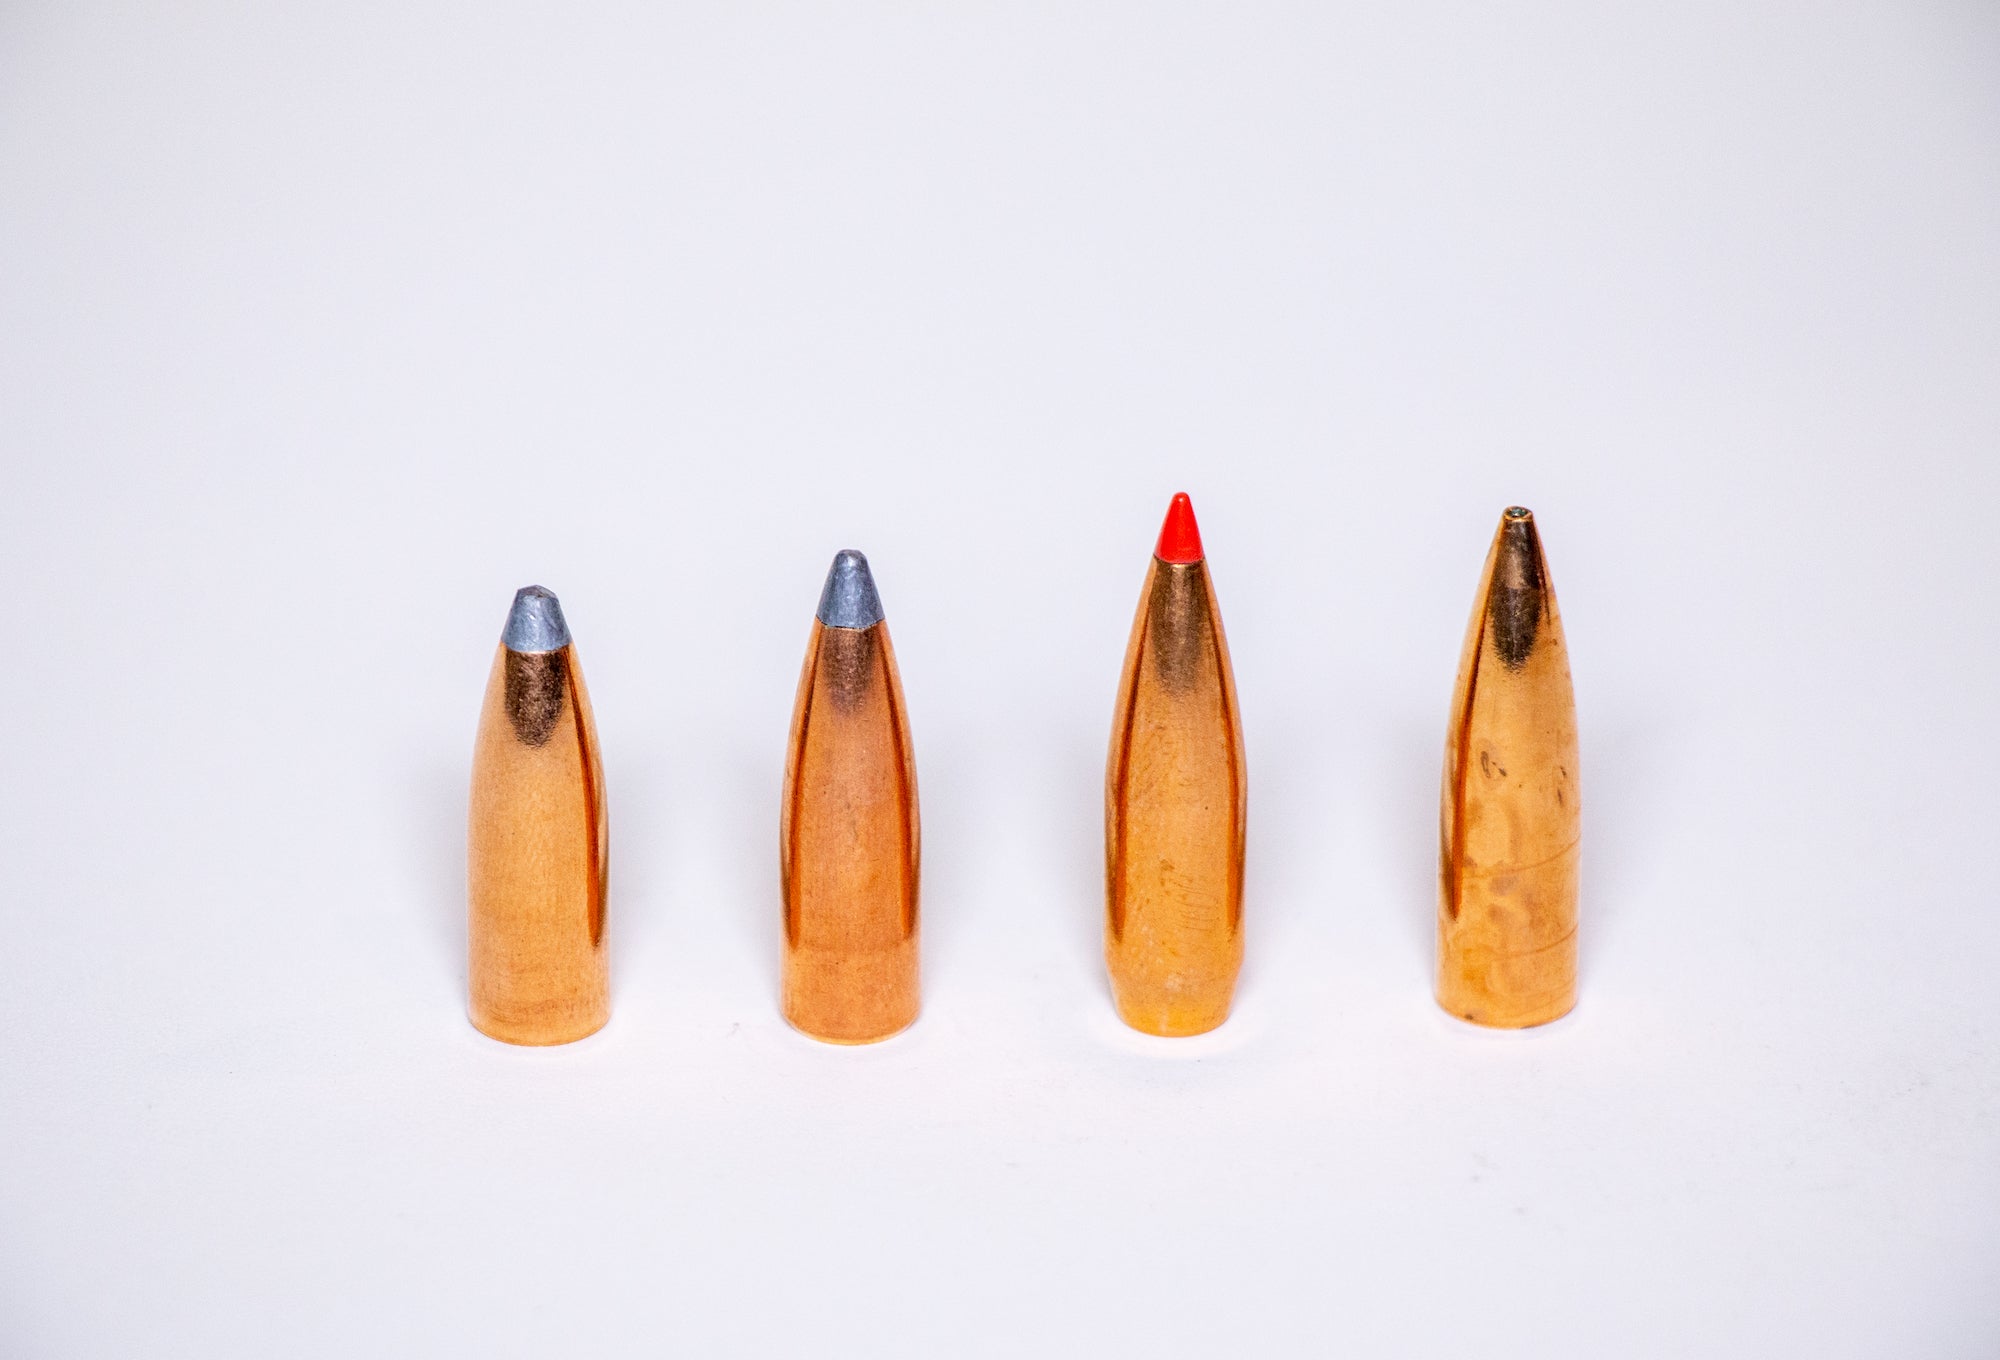 Four bullets on a white background.